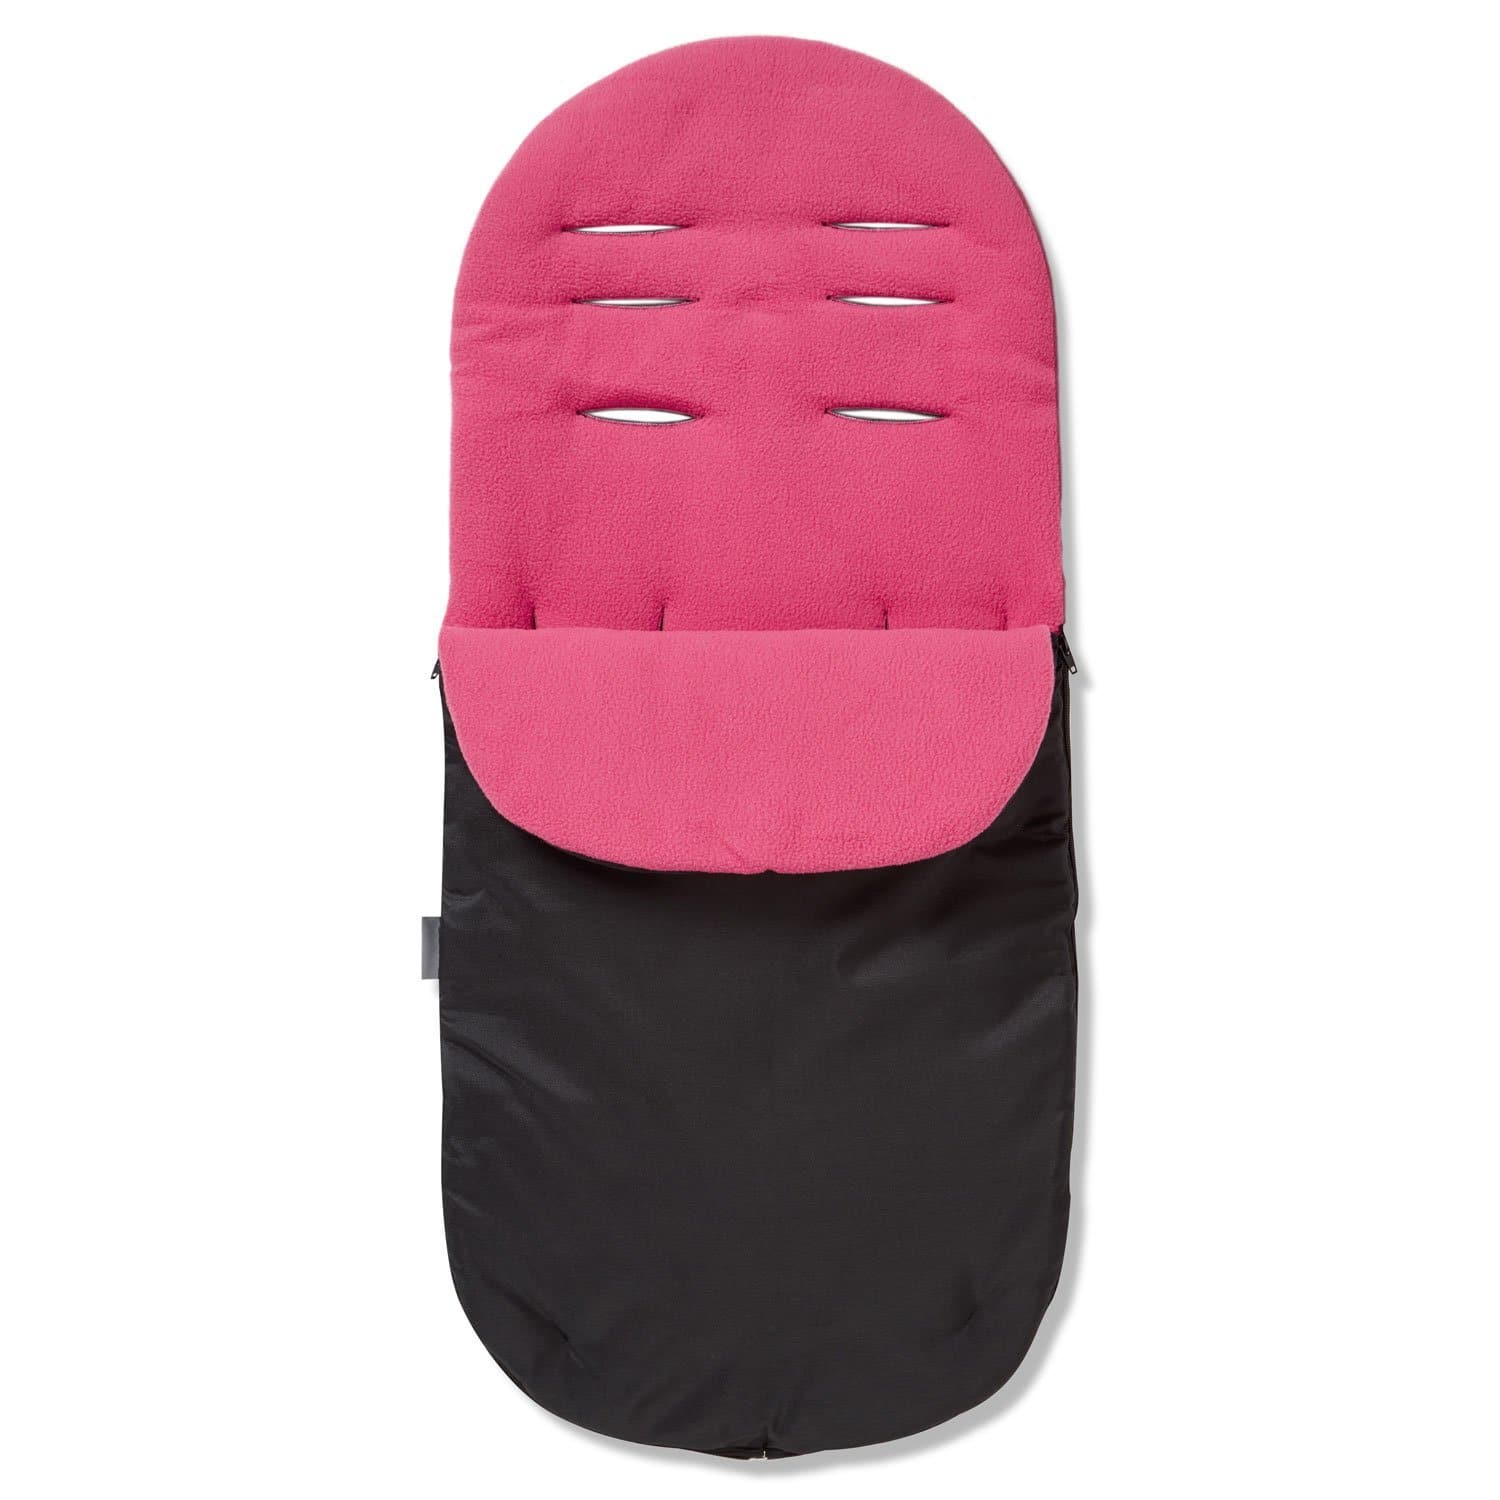 Footmuff / Cosy Toes Compatible with Hesba - Dark Pink / Fits All Models | For Your Little One